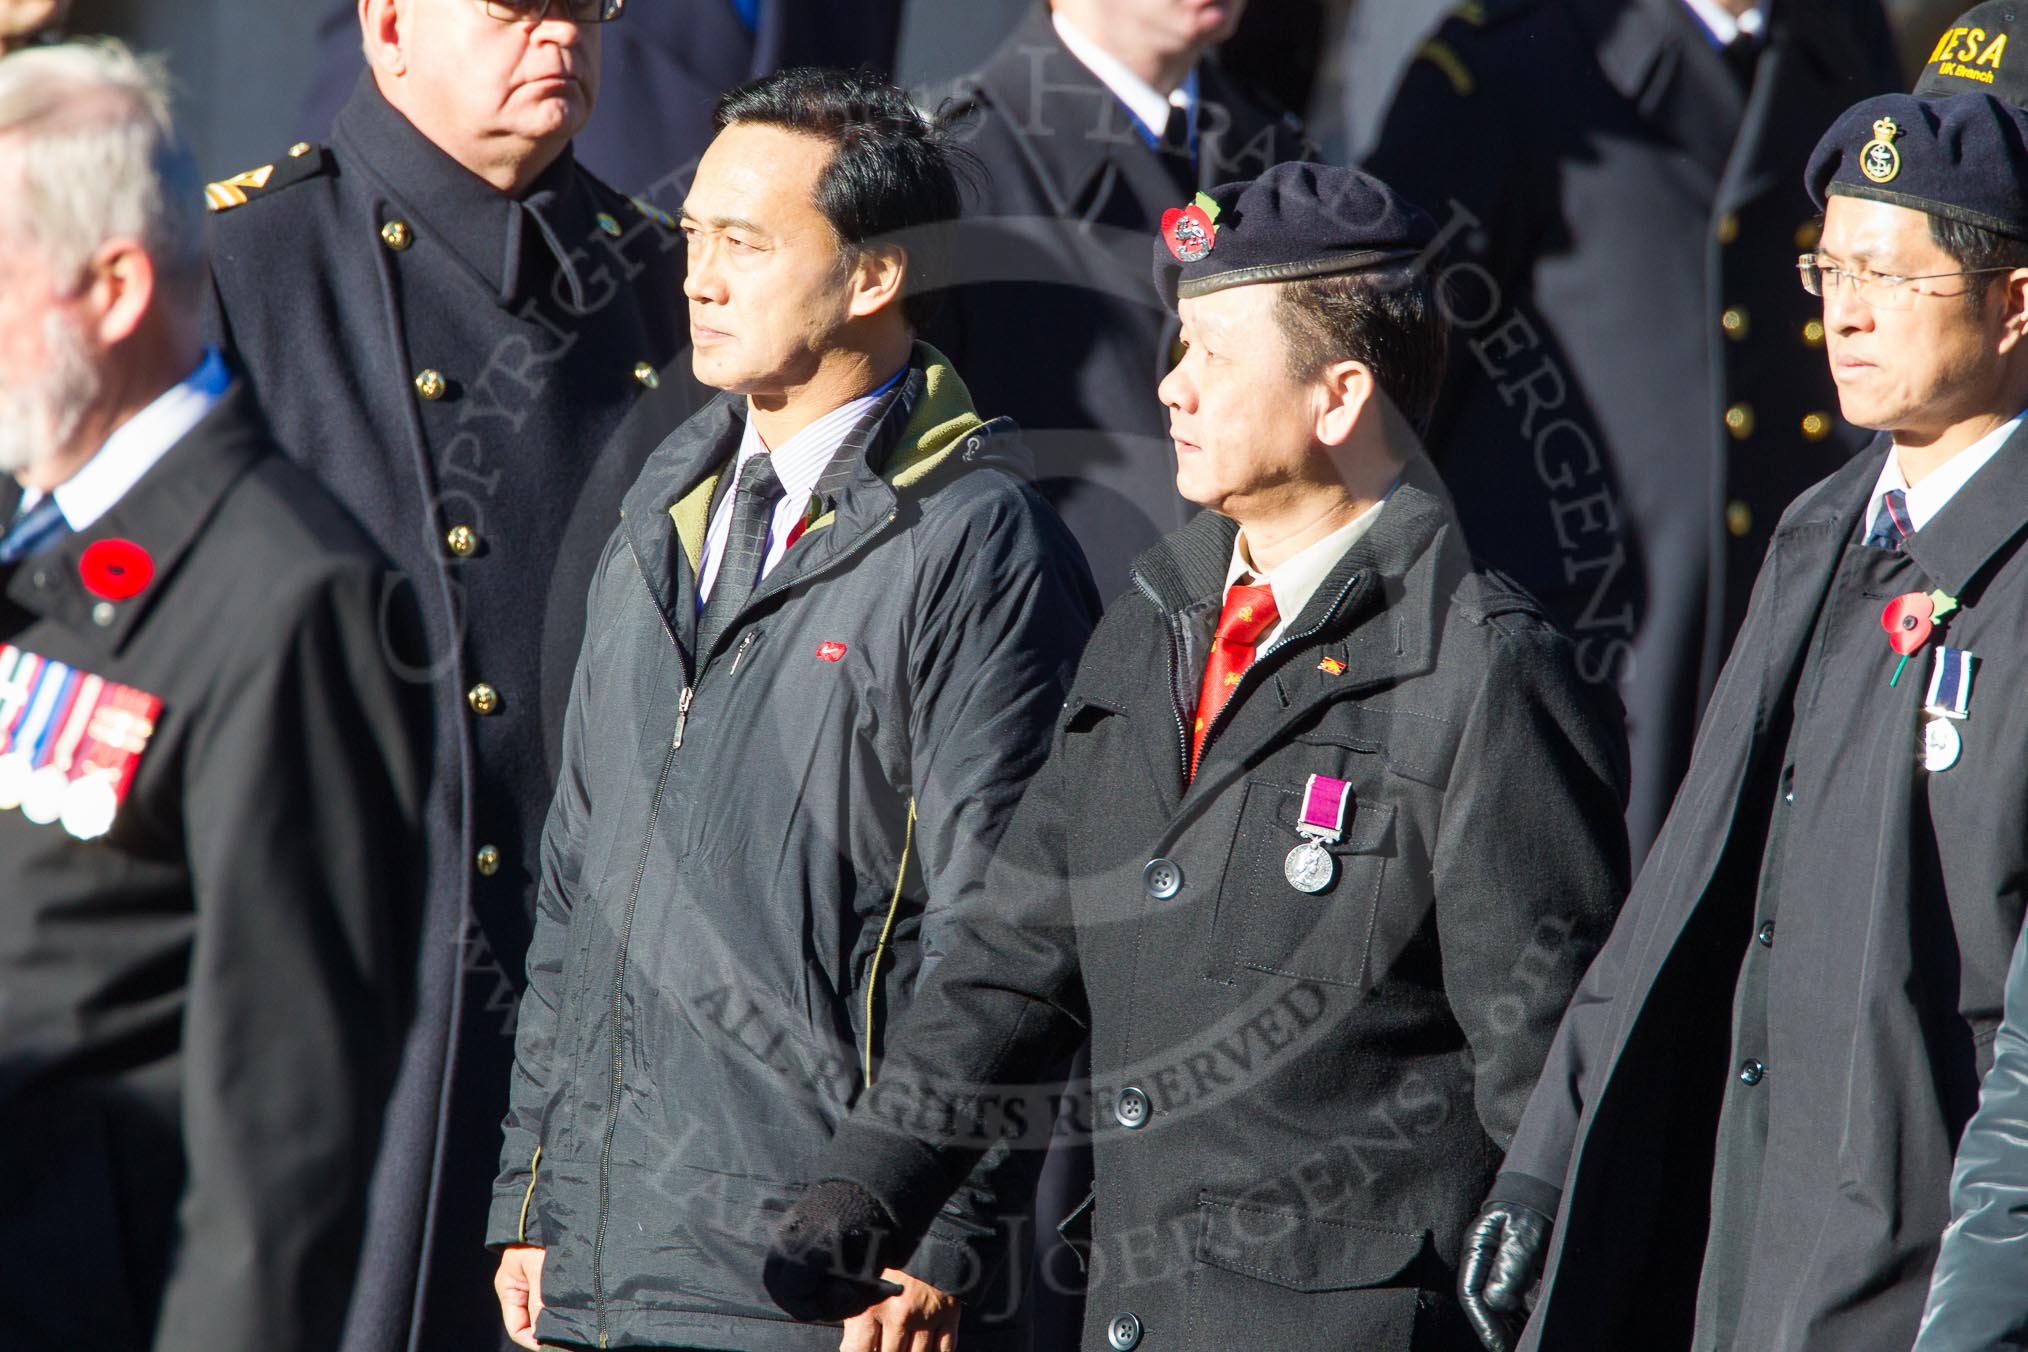 Remembrance Sunday Cenotaph March Past 2013: D9 - Hong Kong Ex-Servicemen's Association (UK Branch)..
Press stand opposite the Foreign Office building, Whitehall, London SW1,
London,
Greater London,
United Kingdom,
on 10 November 2013 at 11:39, image #75